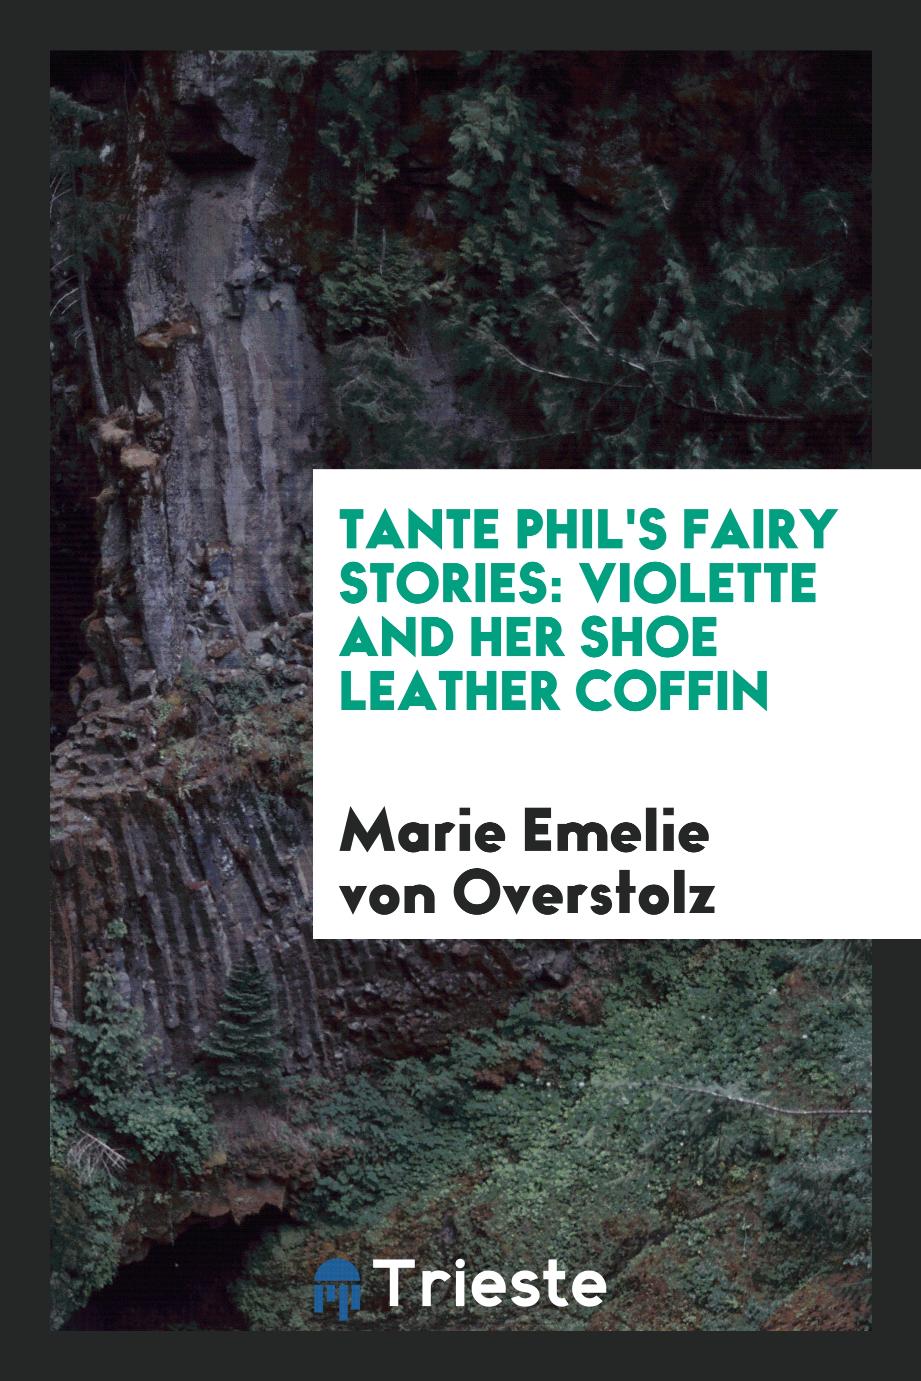 Tante Phil's Fairy Stories: Violette and Her Shoe Leather Coffin